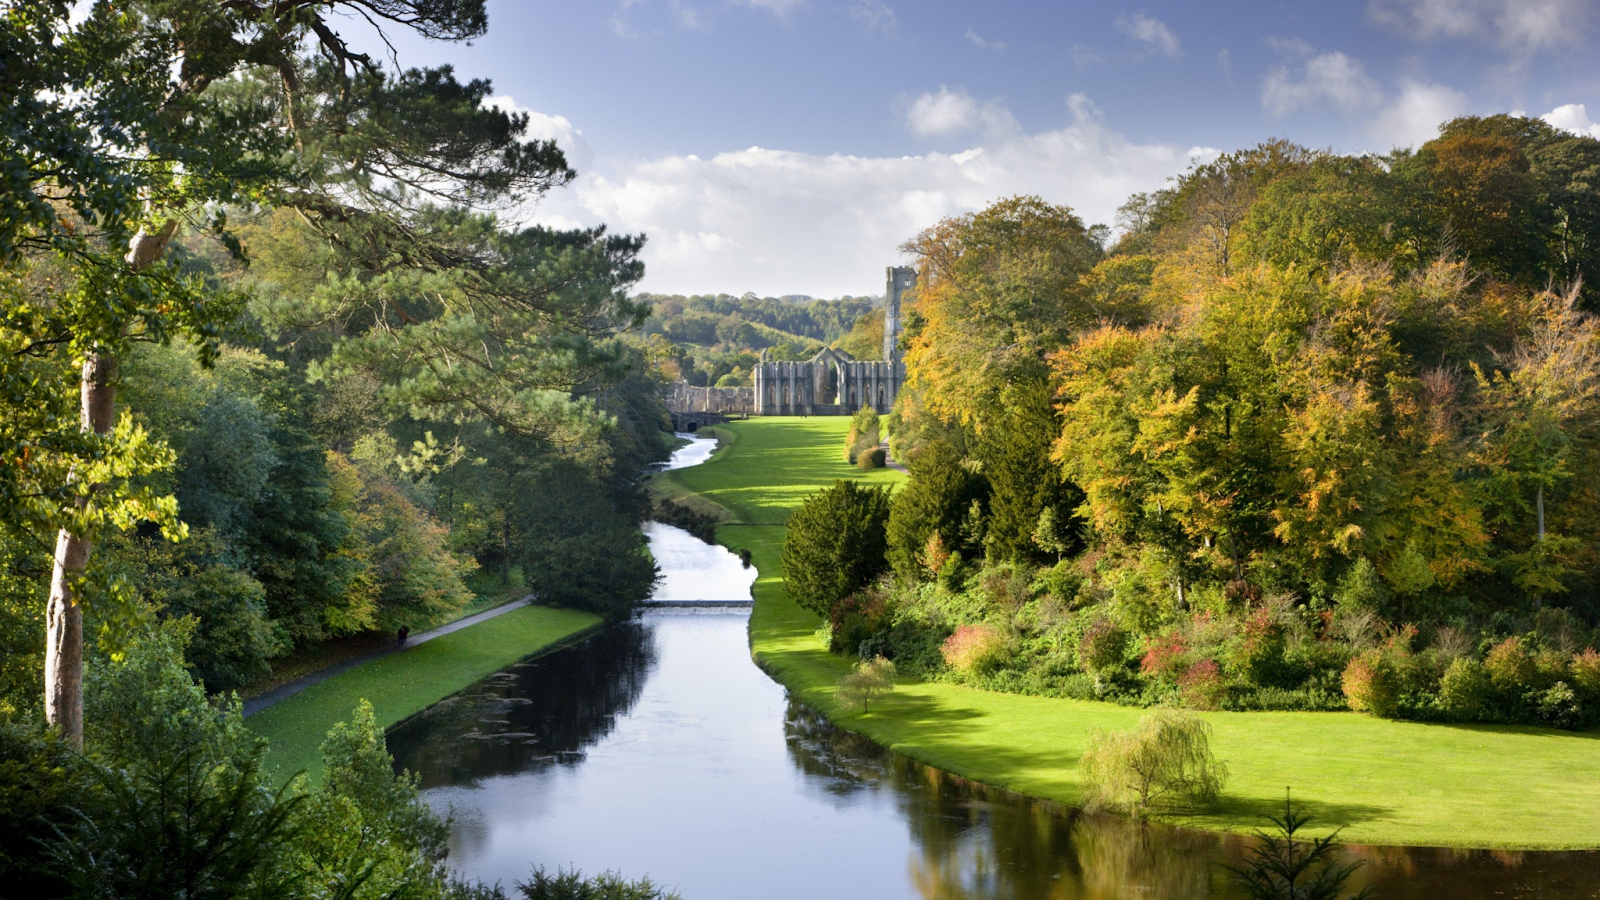 An image showing Fountains Abbey and Studley Royal, a National Trust site 